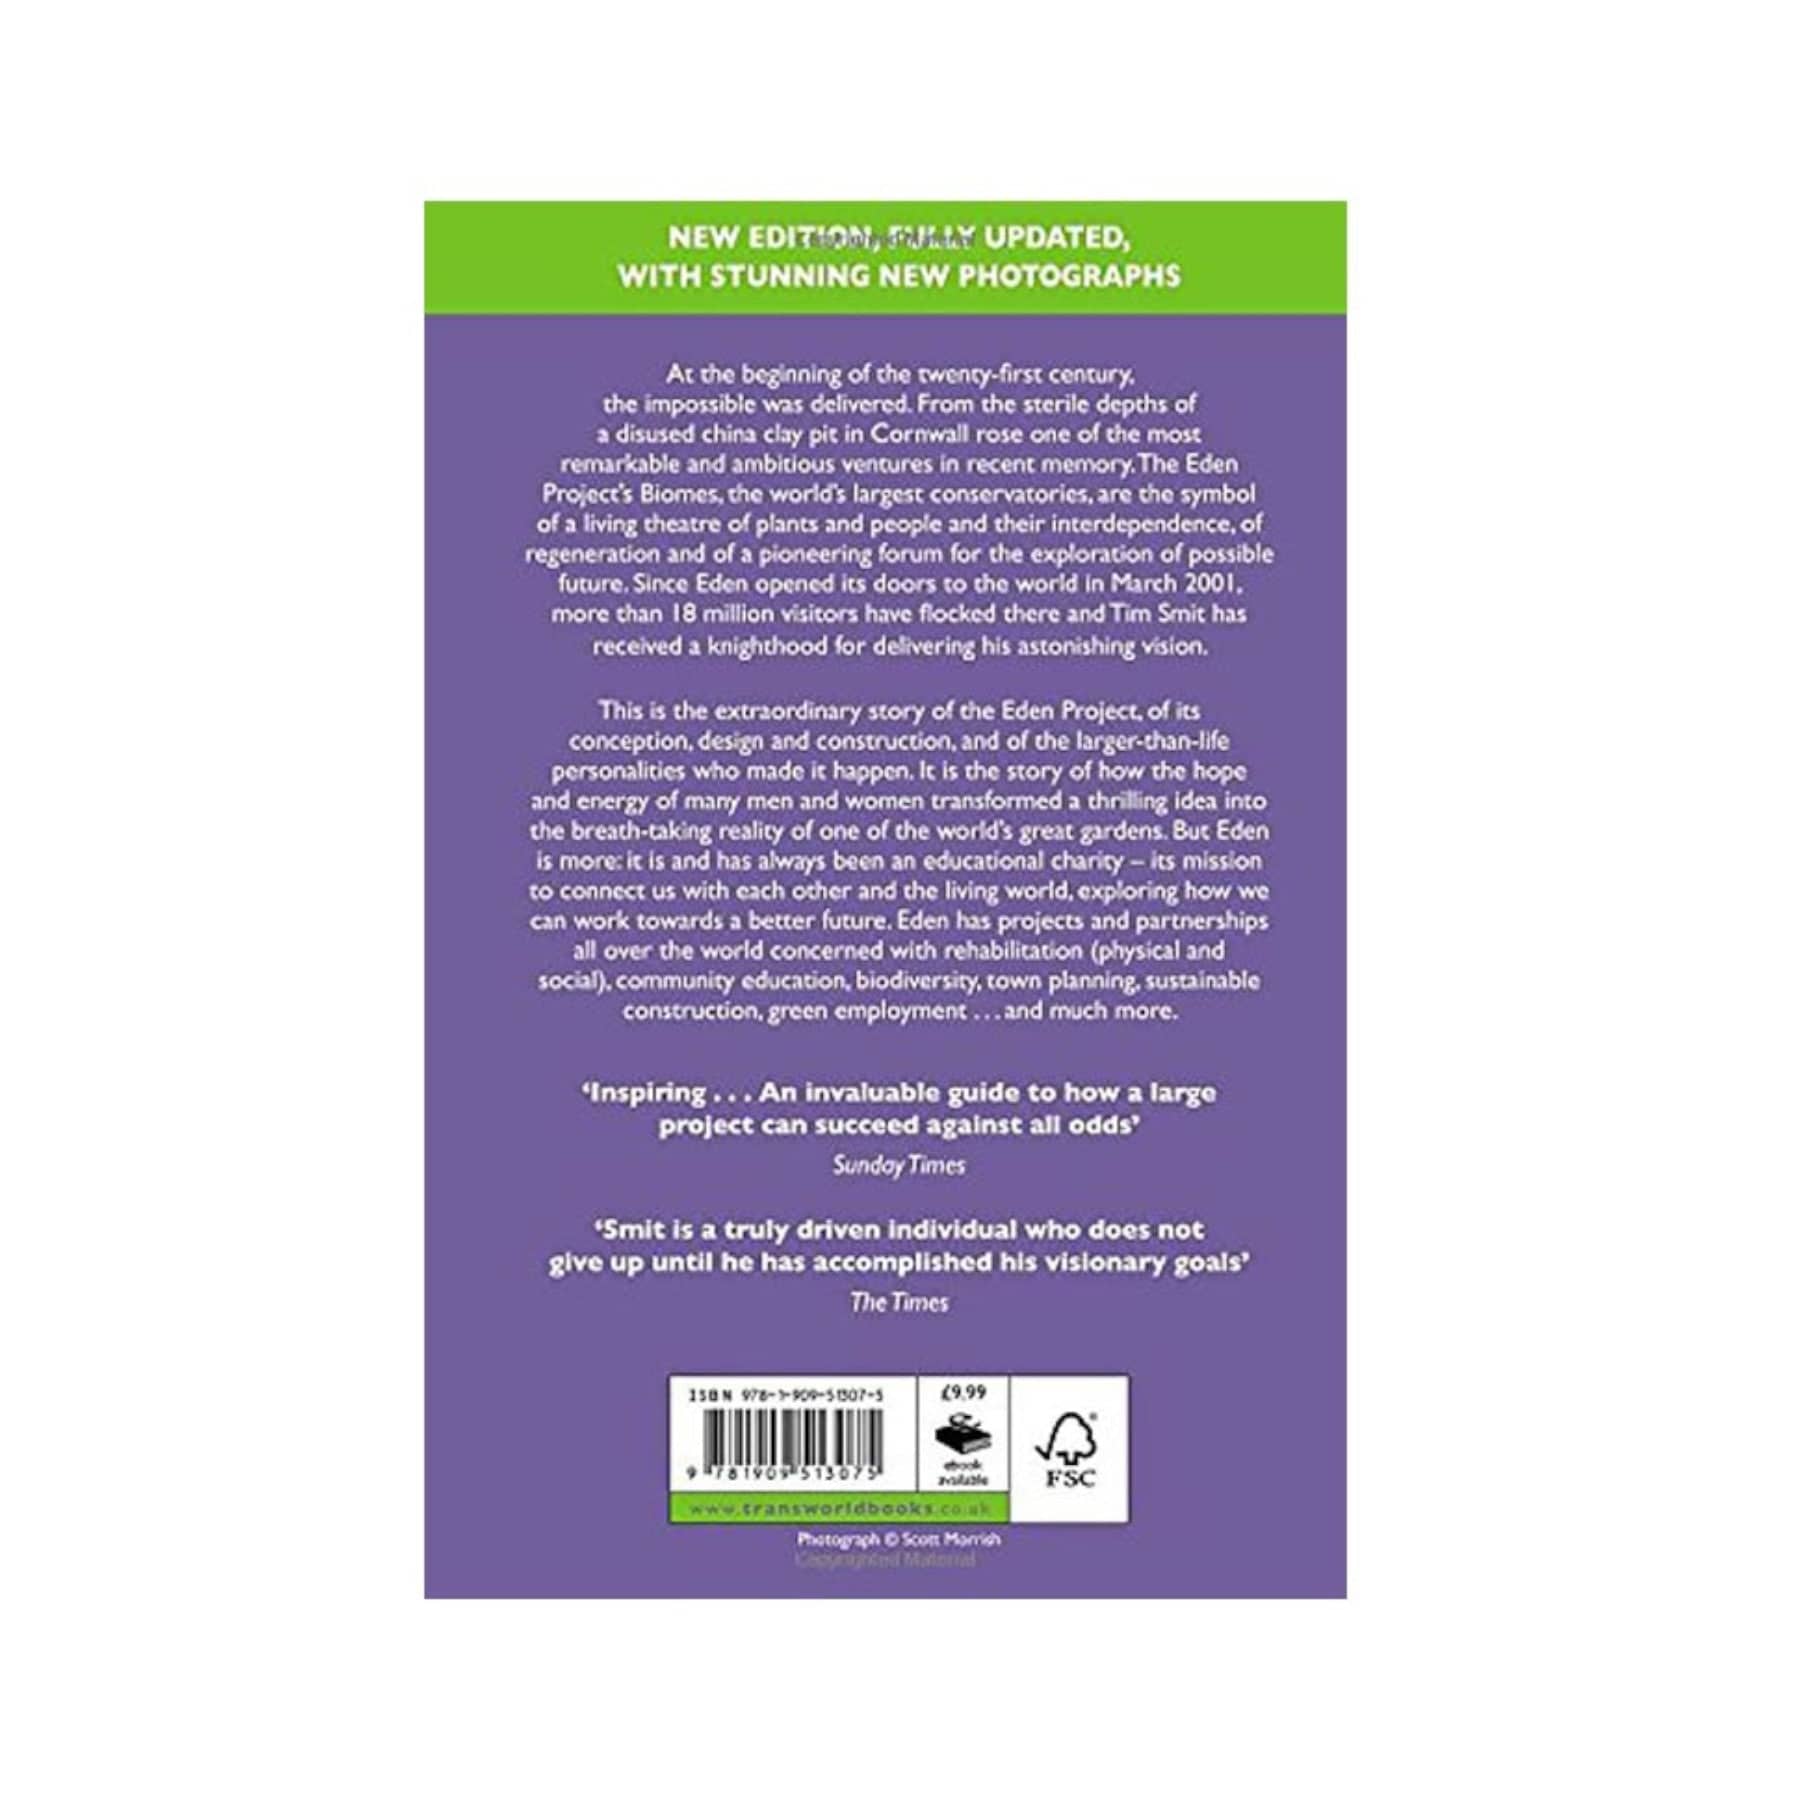 Back cover of a book detailing the Eden Project with reviews, barcode, price tag, and web address